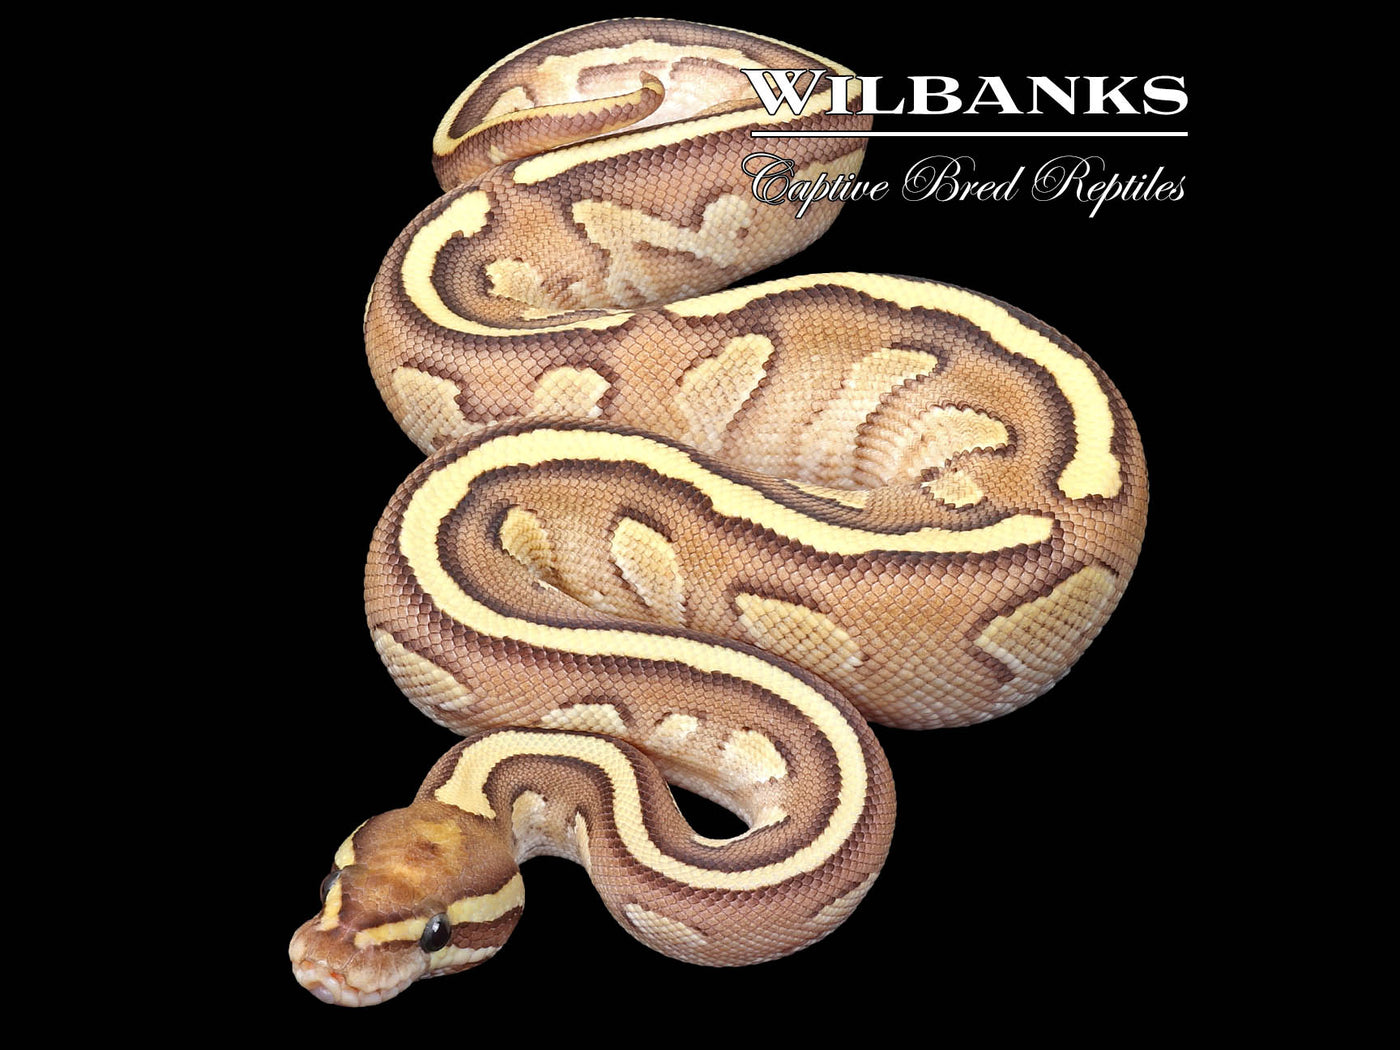 Nuclear Yellow Belly Ball Python ♂ '23